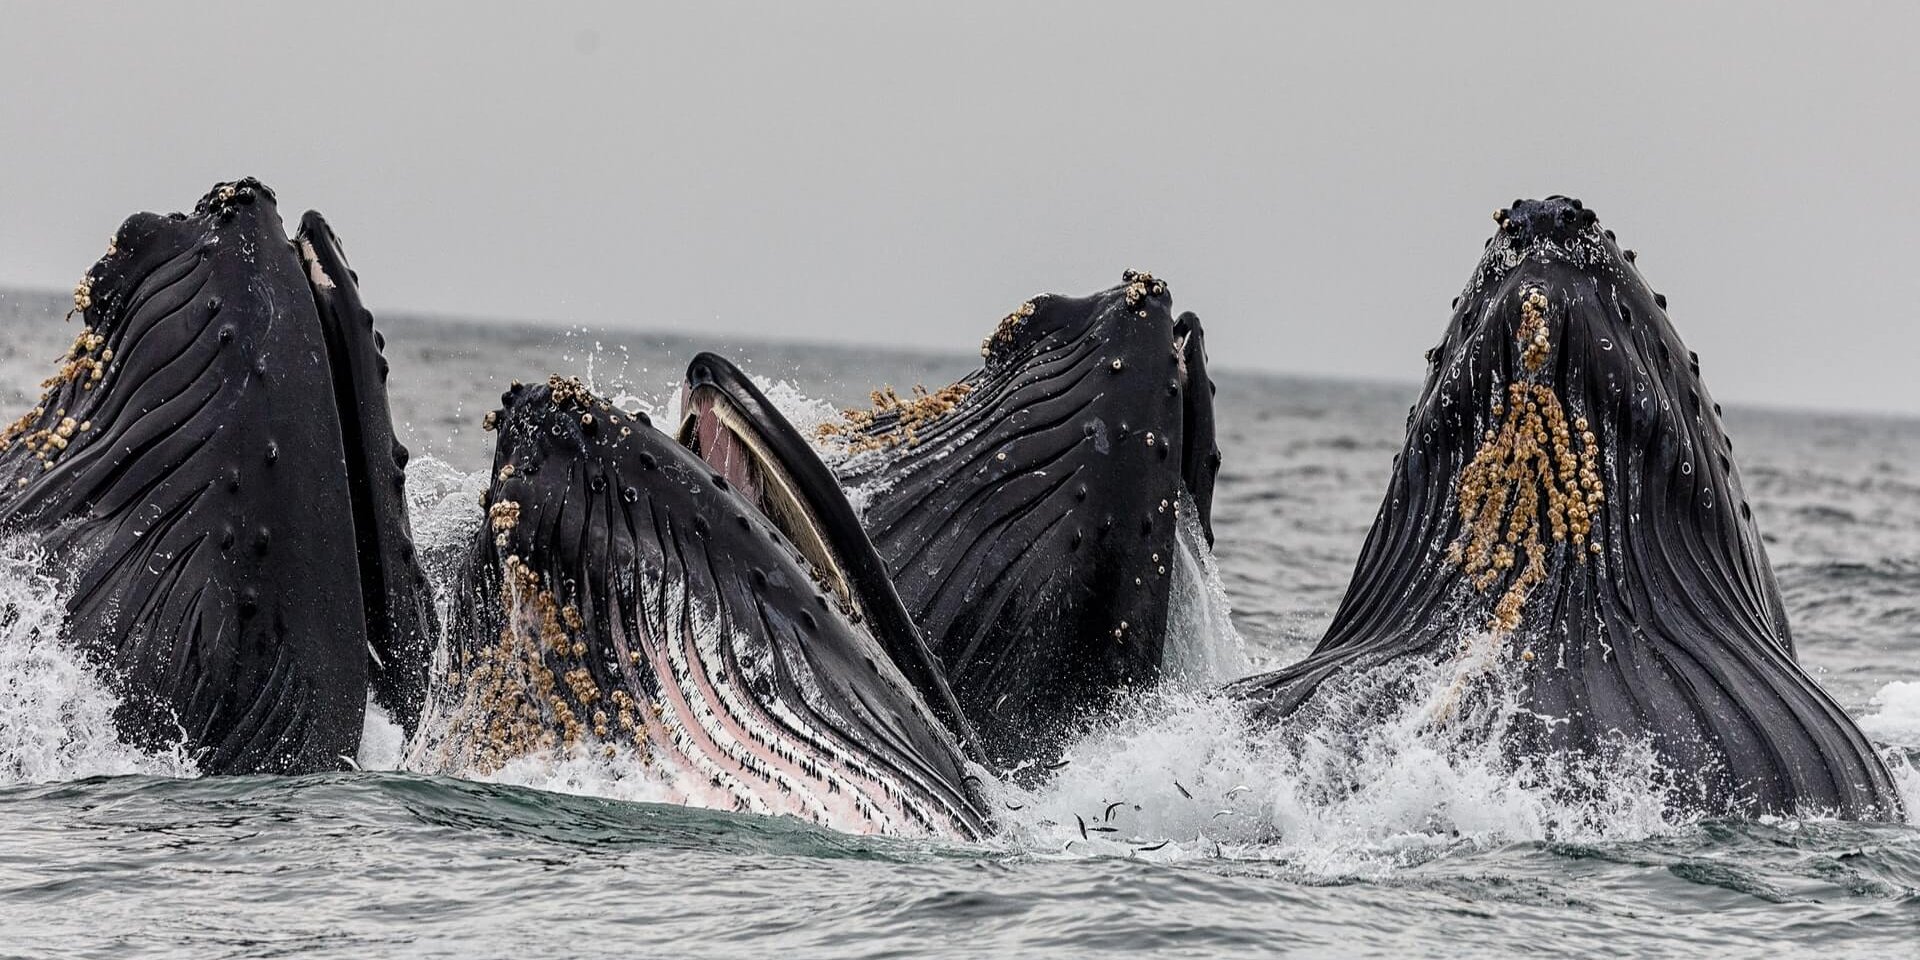 Four humpback whales jumping out of the ocean